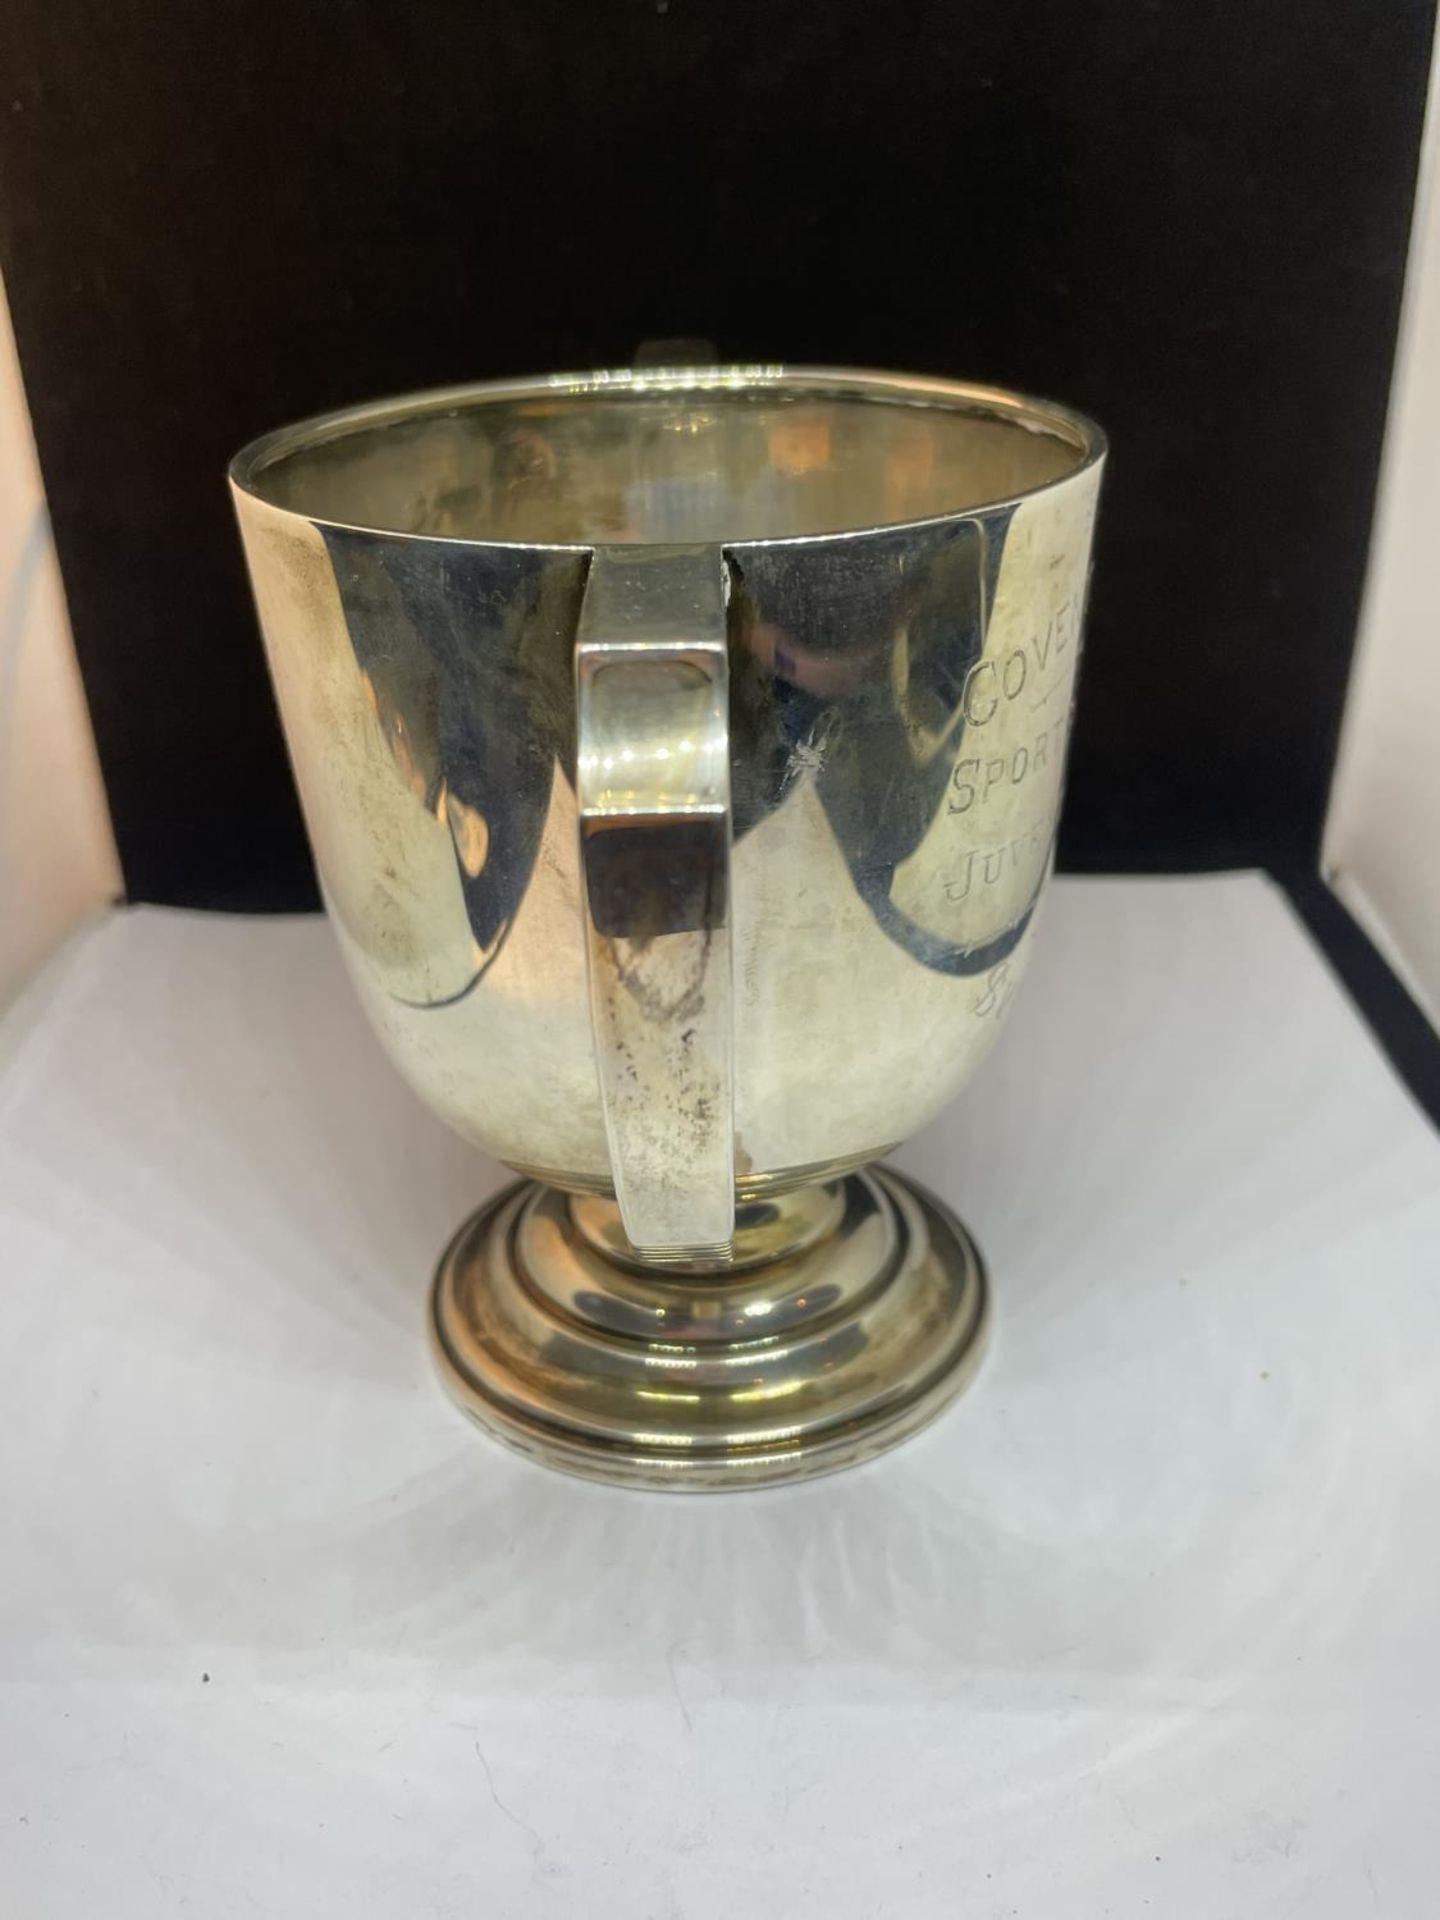 A HALLMARKED BIRMINGHAM SILVER TWIN HANDLED TROPHY FROM COVENTRY COLLEGE 1947 FOR JUVENILE JUMPING - Image 2 of 4